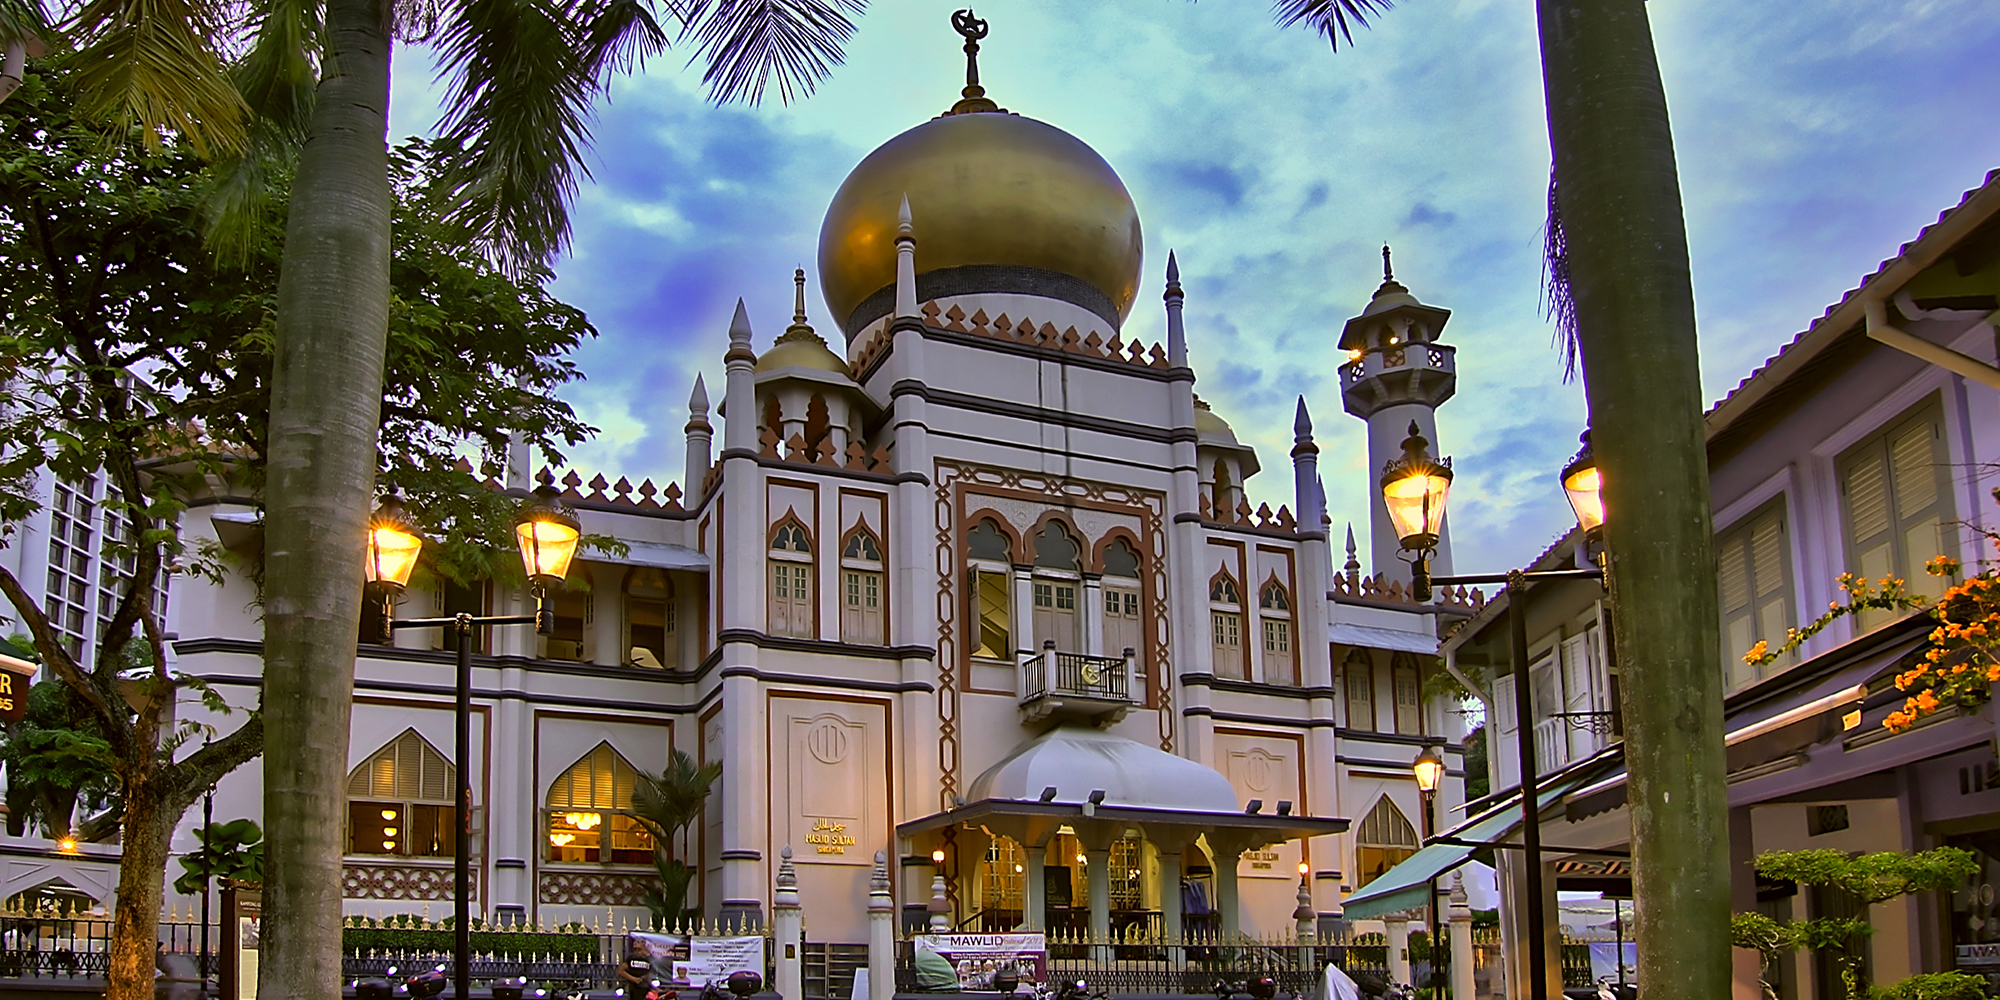 By Erwin Soo from Singapore, Singapore (The Sultan Mosque at Kampong Glam, Singapore) [CC BY 2.0 (http://creativecommons.org/licenses/by/2.0)], via Wikimedia Commons